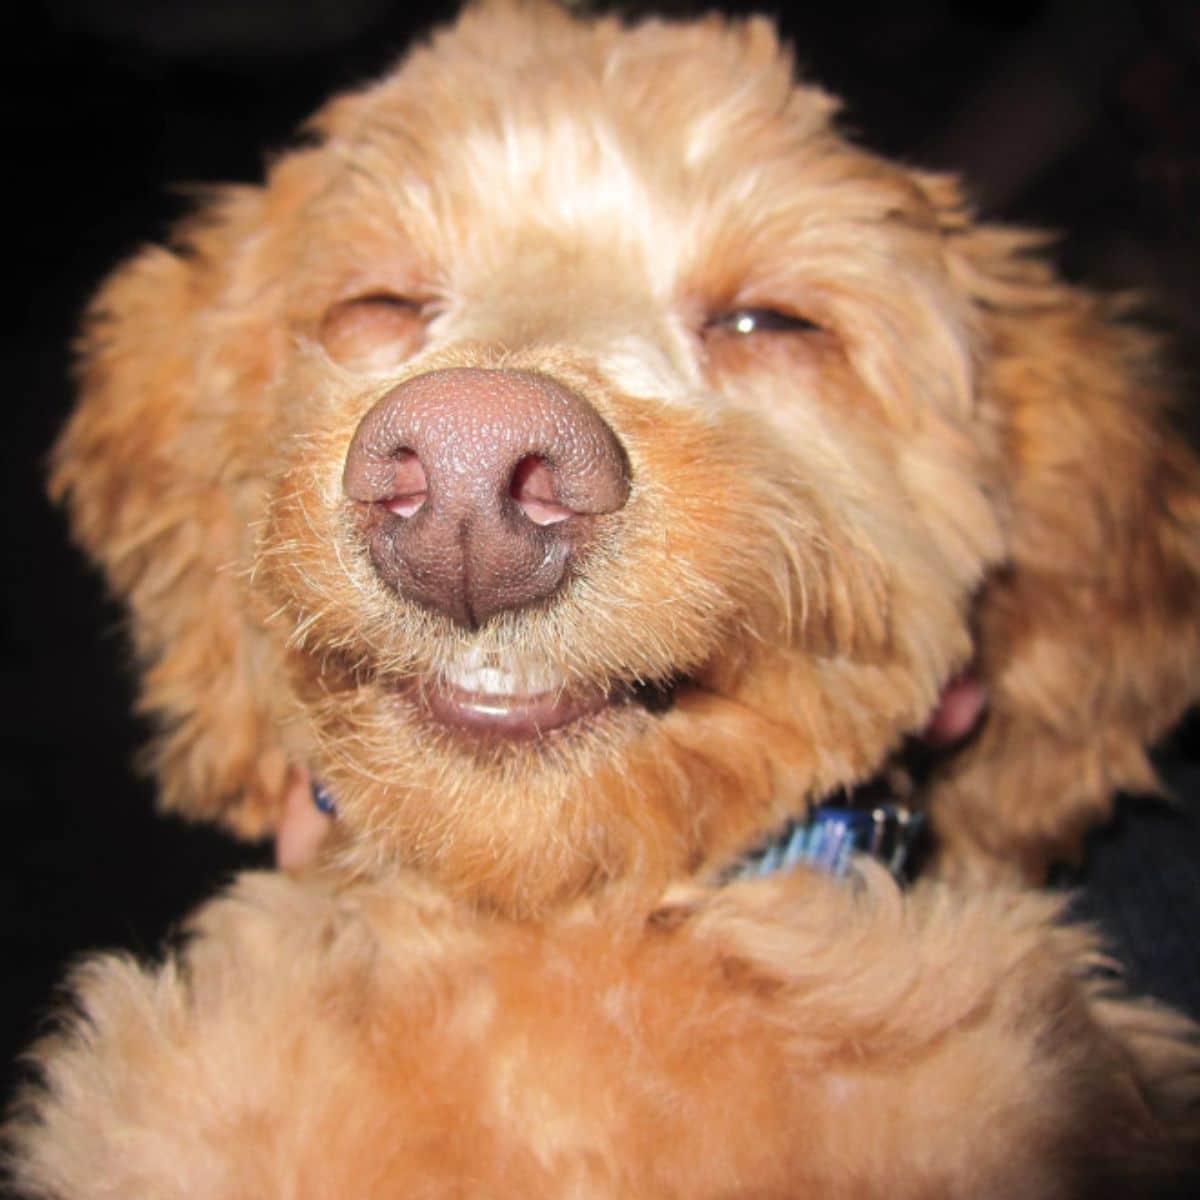 close up of smiling fluffy brown dog's face